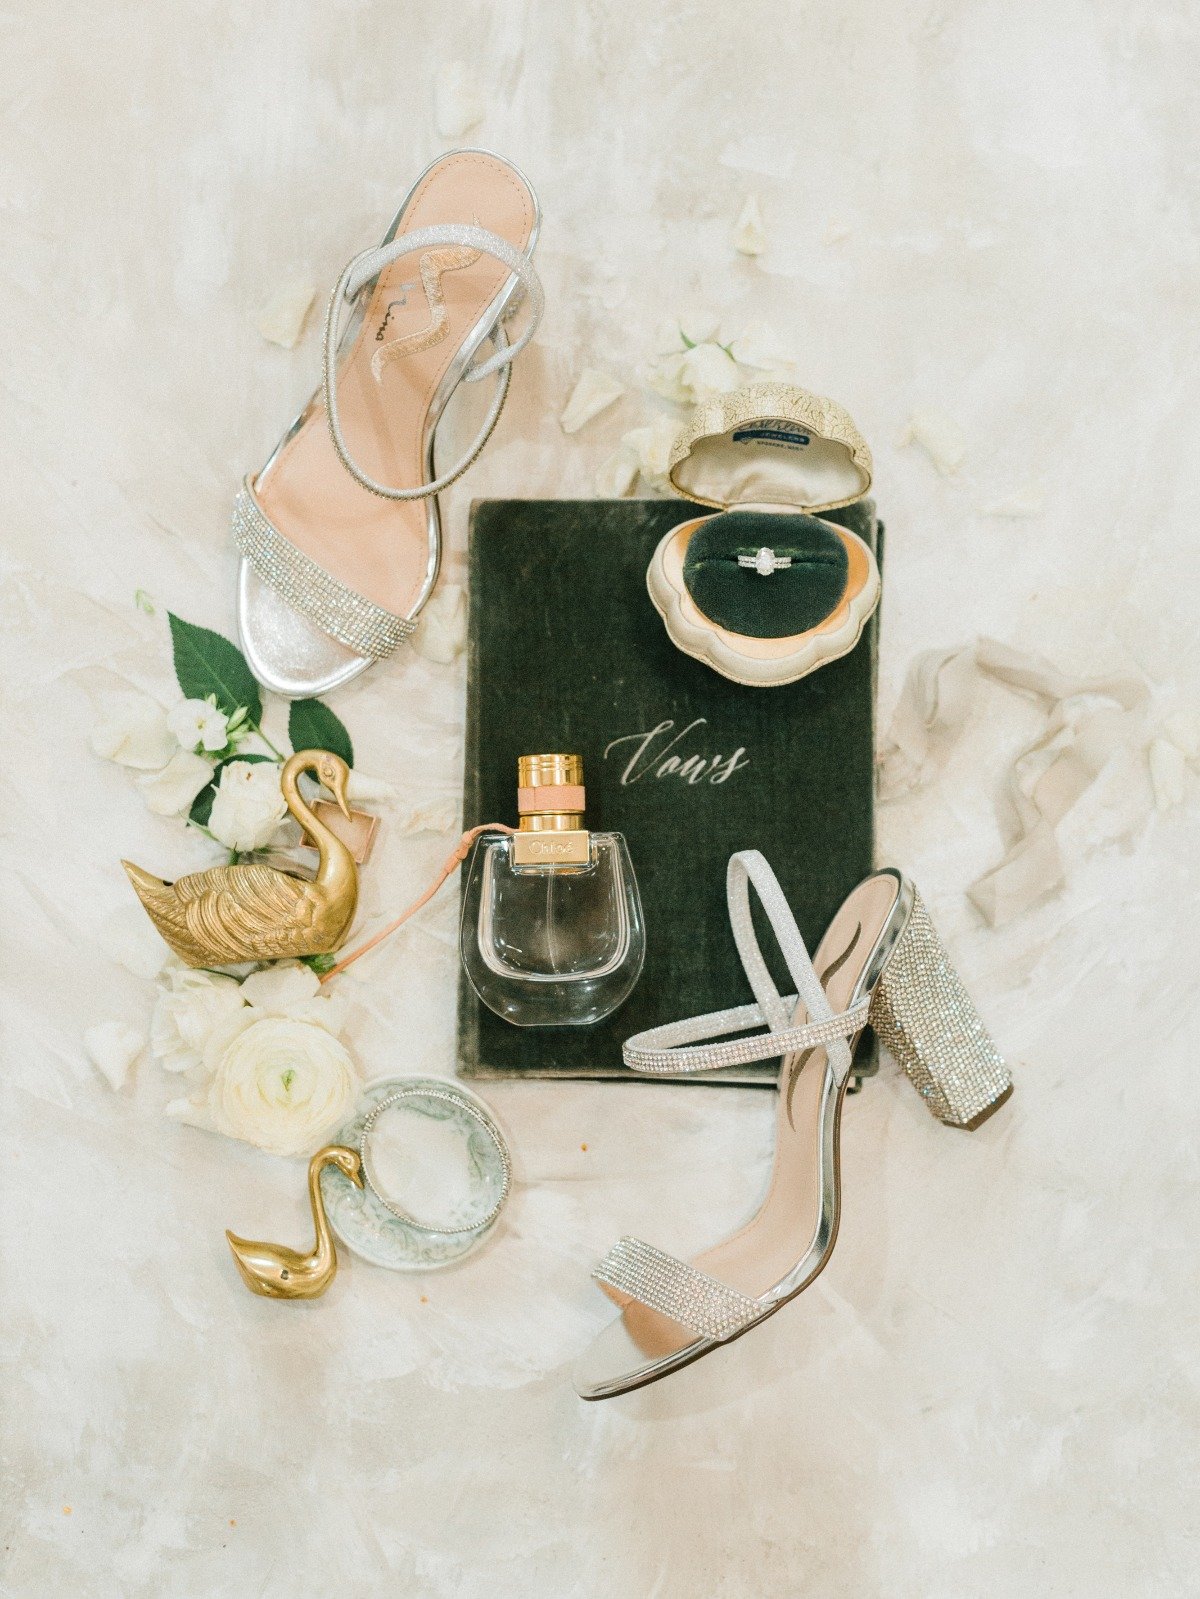 Vows, wedding shoes, and wedding band